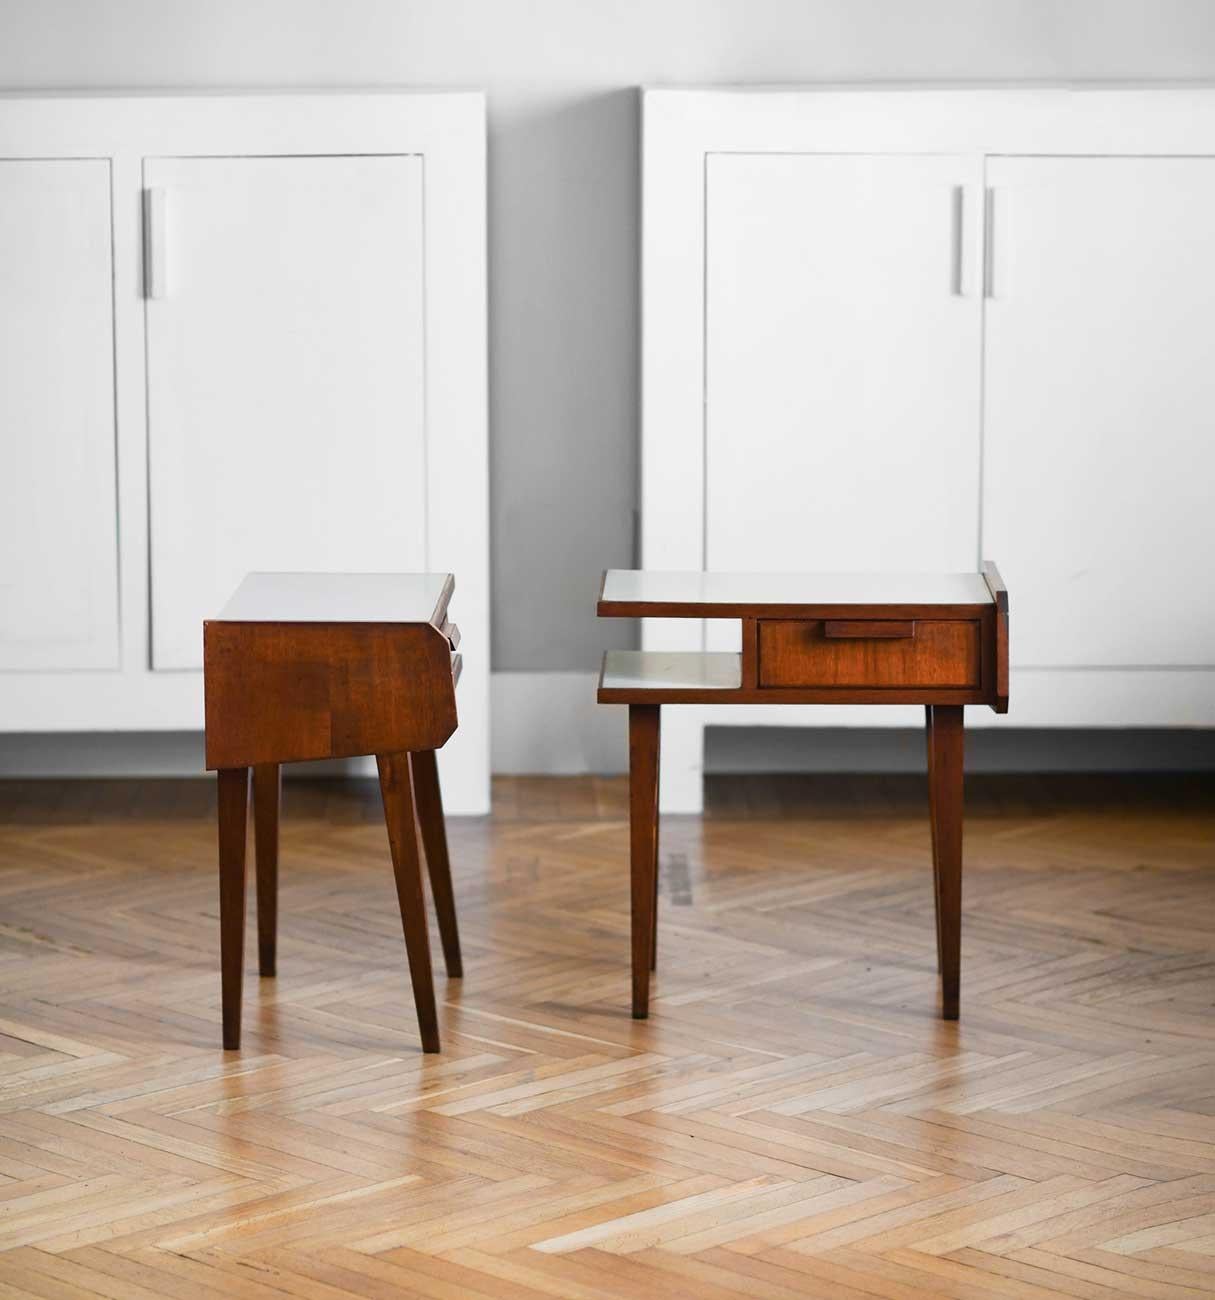 Pair of 1950s vintage bedside tables made of wood with formica shelves.
Italian manifacture, 1950s.